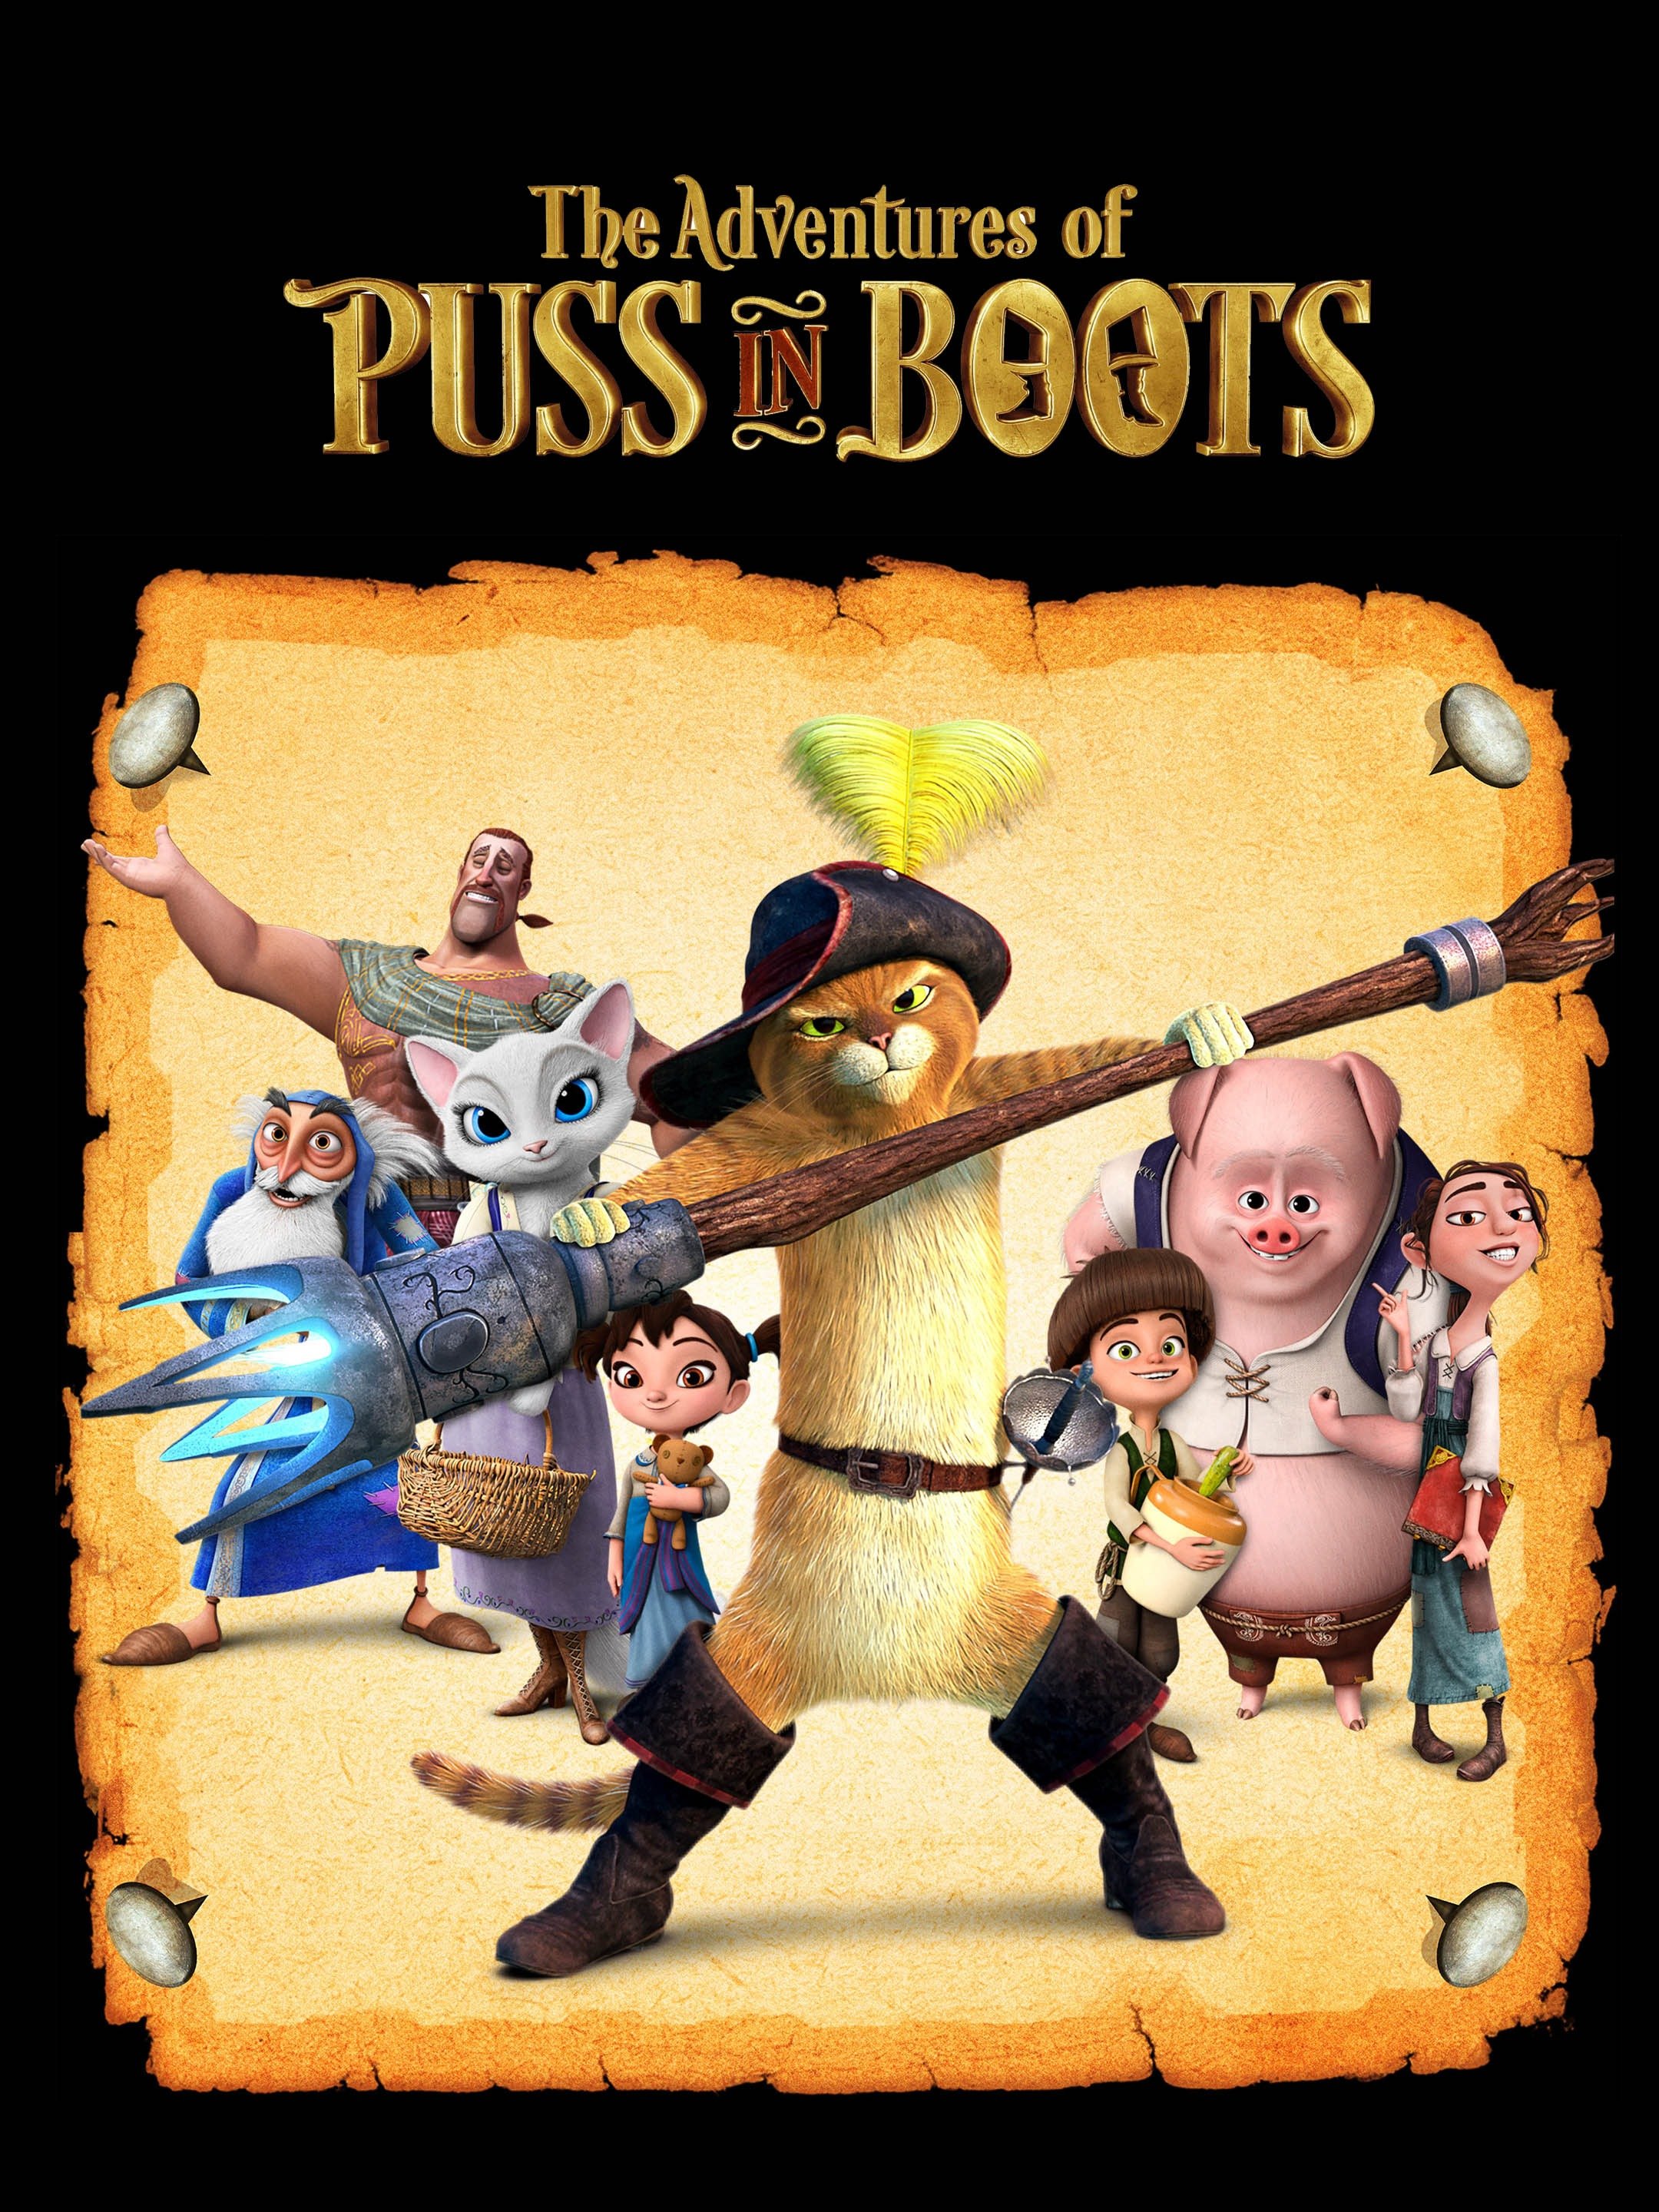 Puss In Boots Dvd